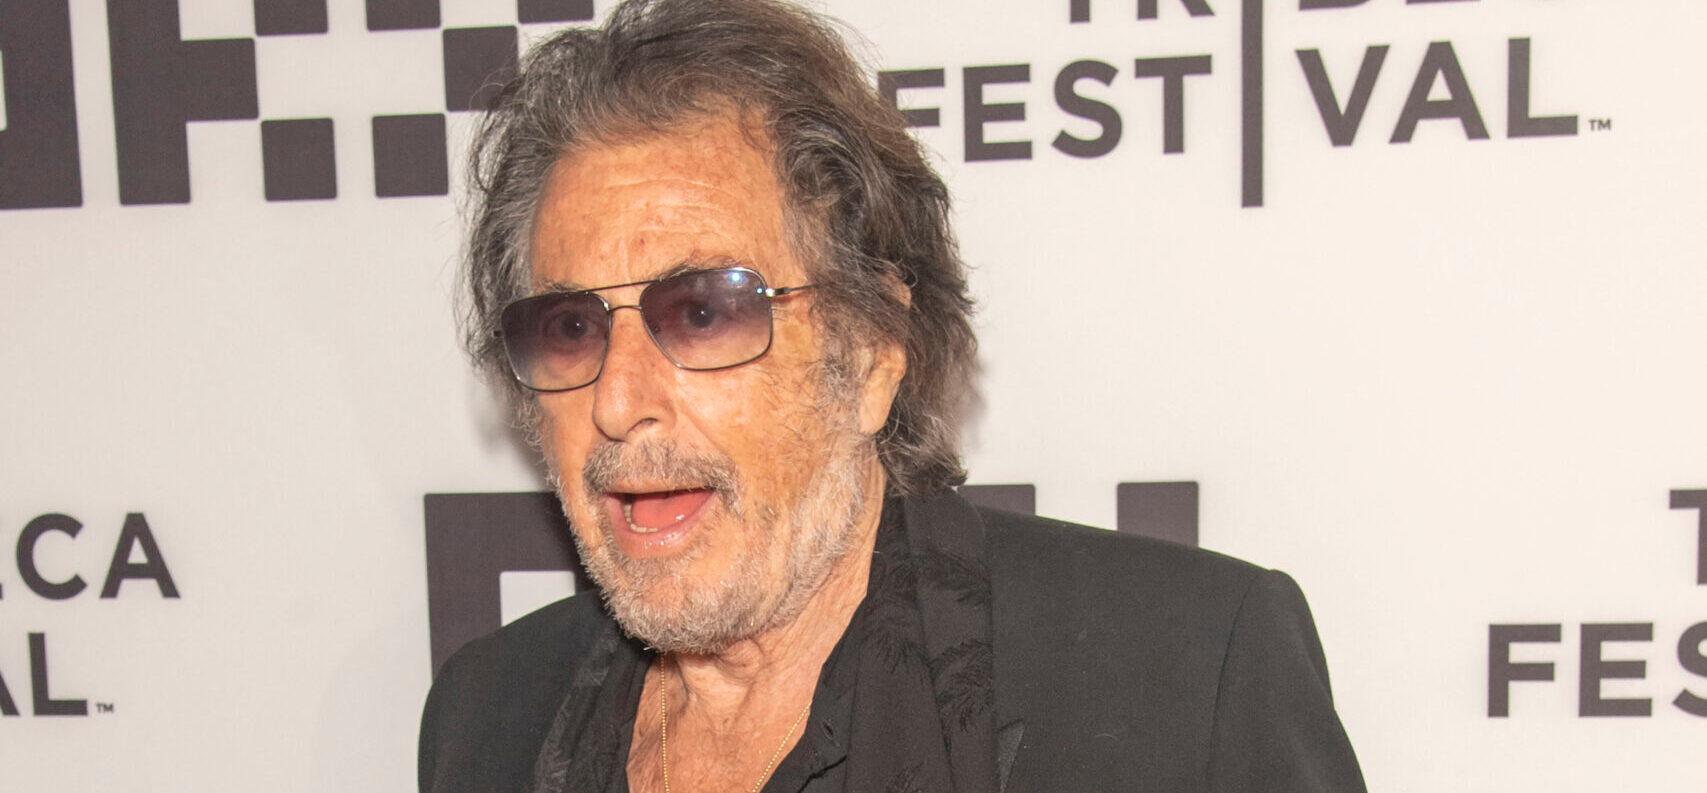 Al Pacino’s Girlfriend Gives Birth, Actor Is A Father Again At 83 Years Old!